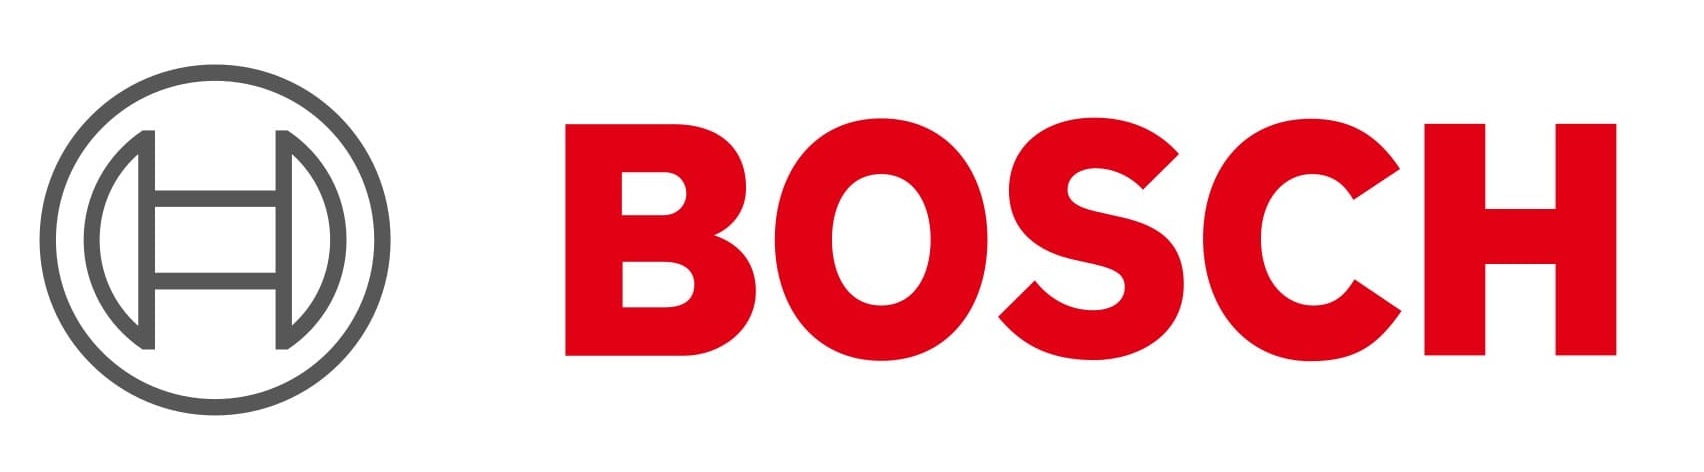 BOSCH Repair Ovens, Viking Stoves Oven Service